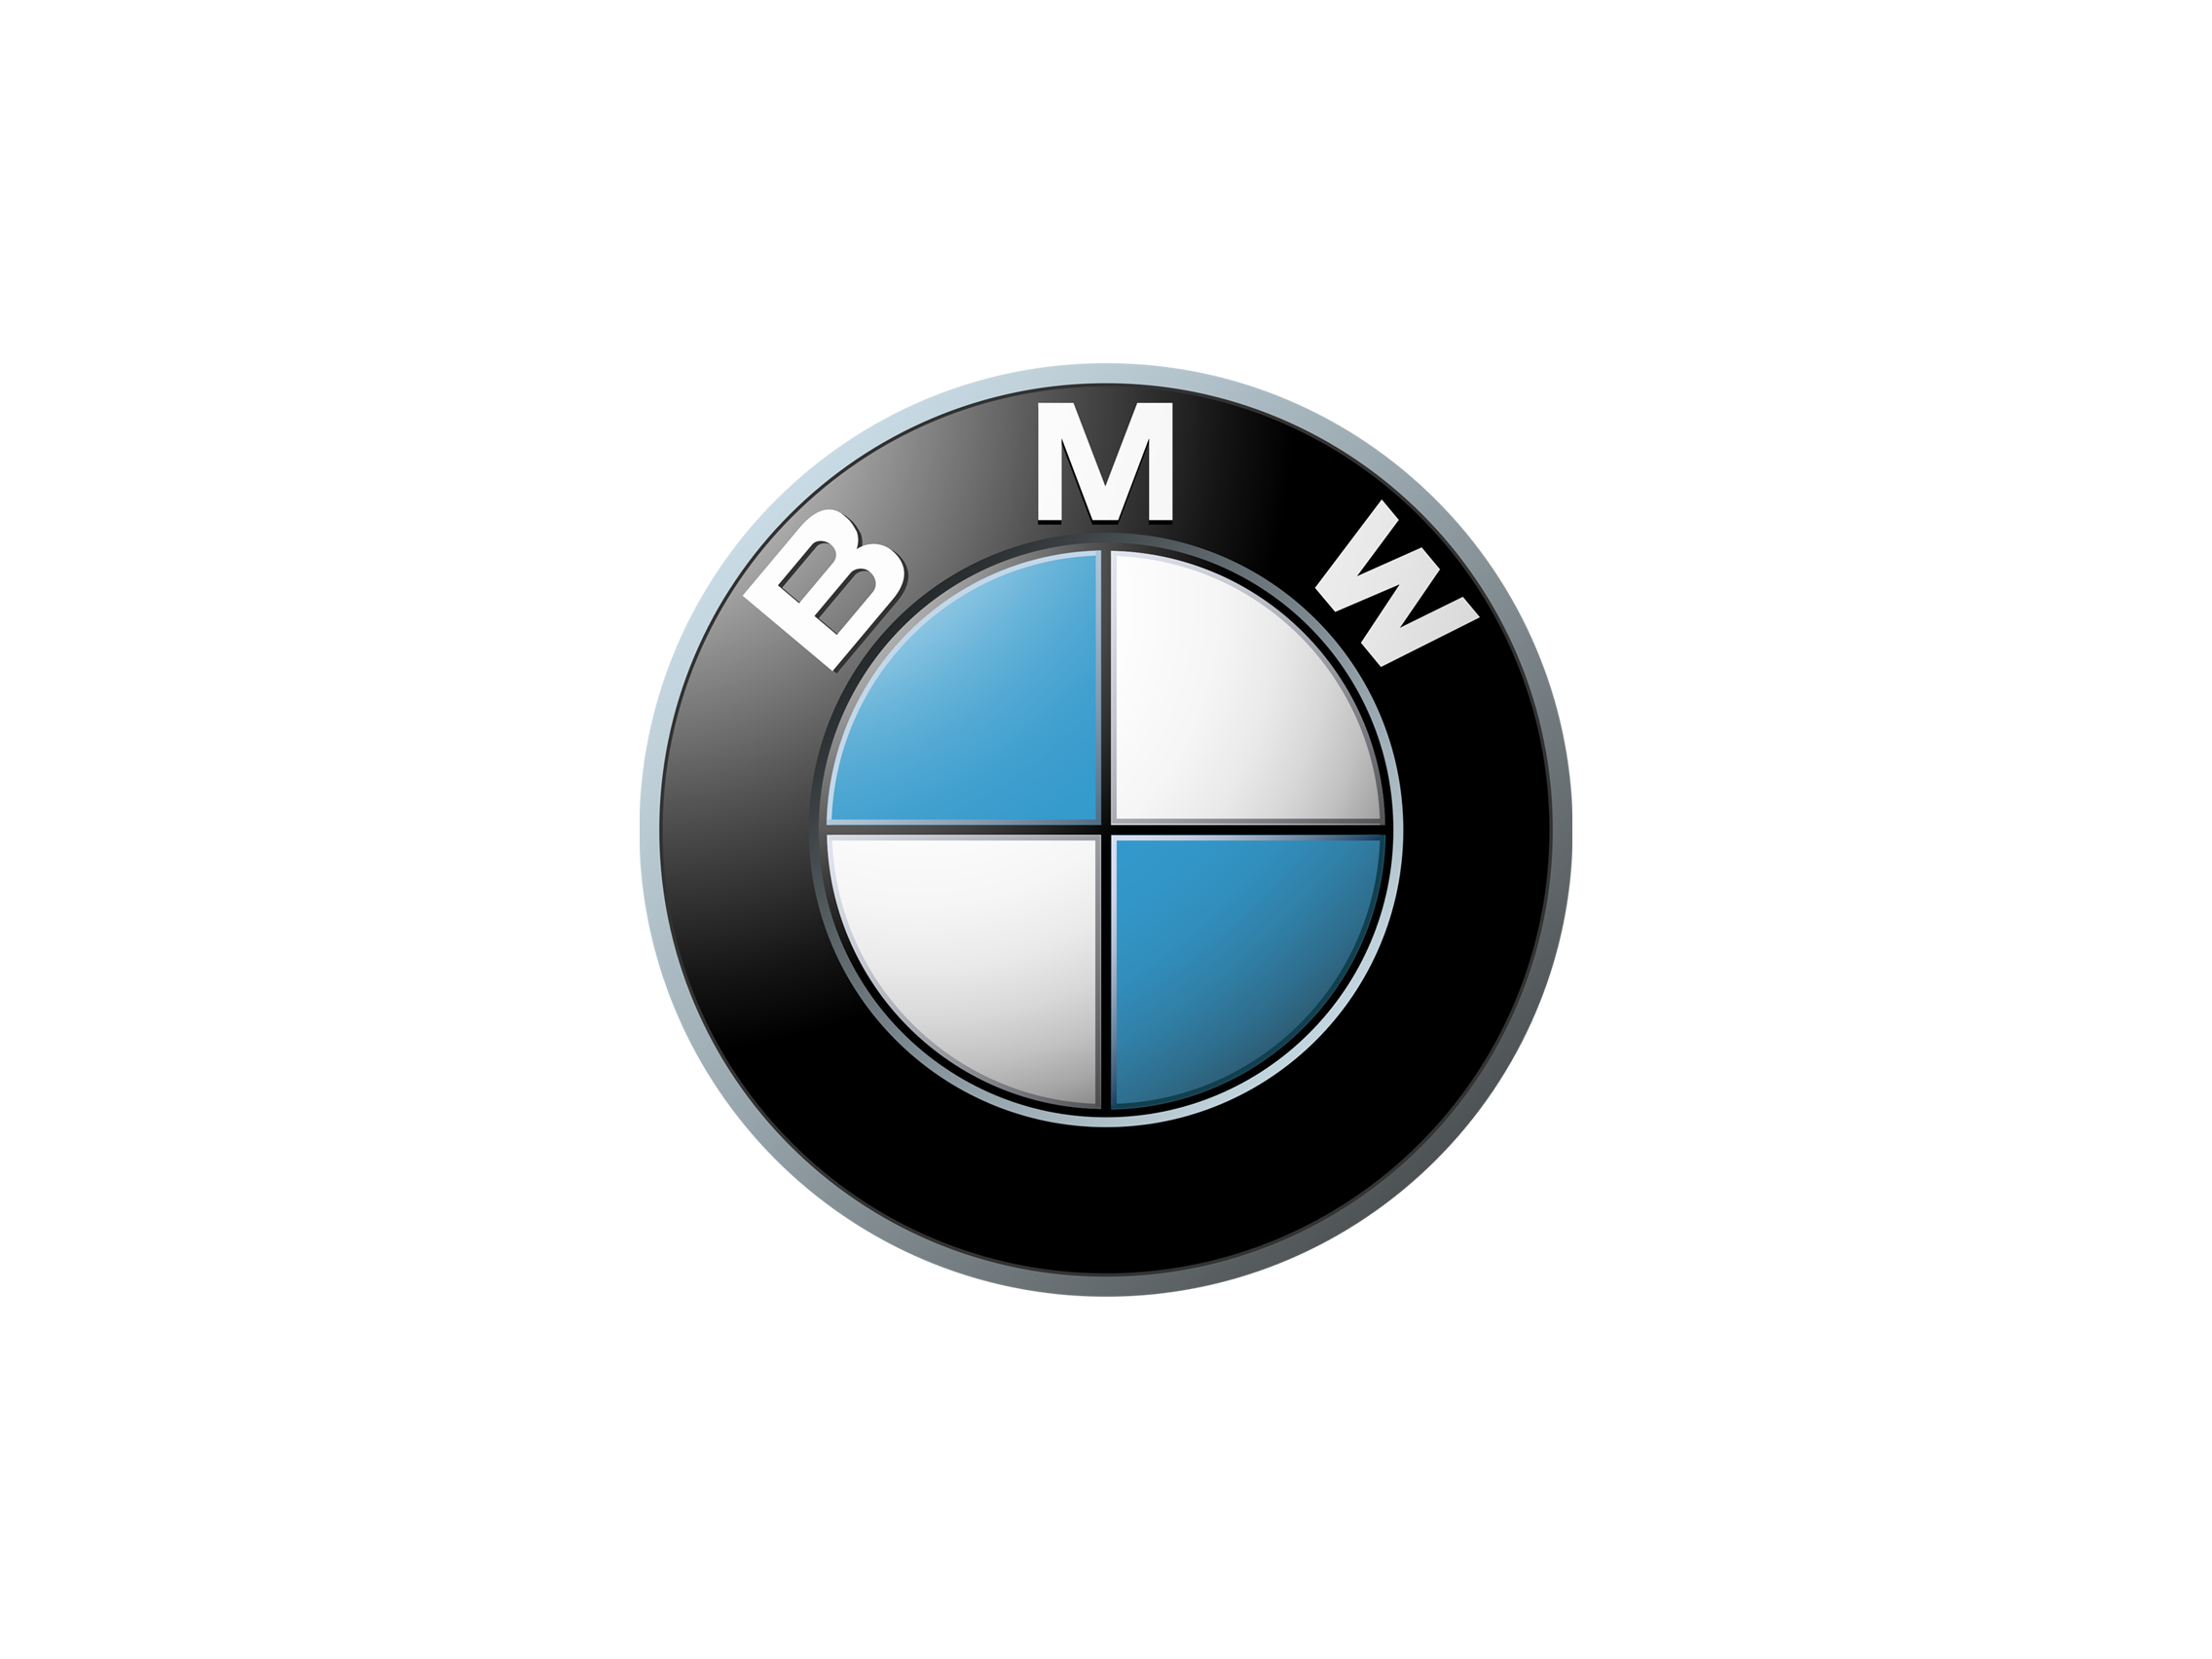 We have done works for BMW